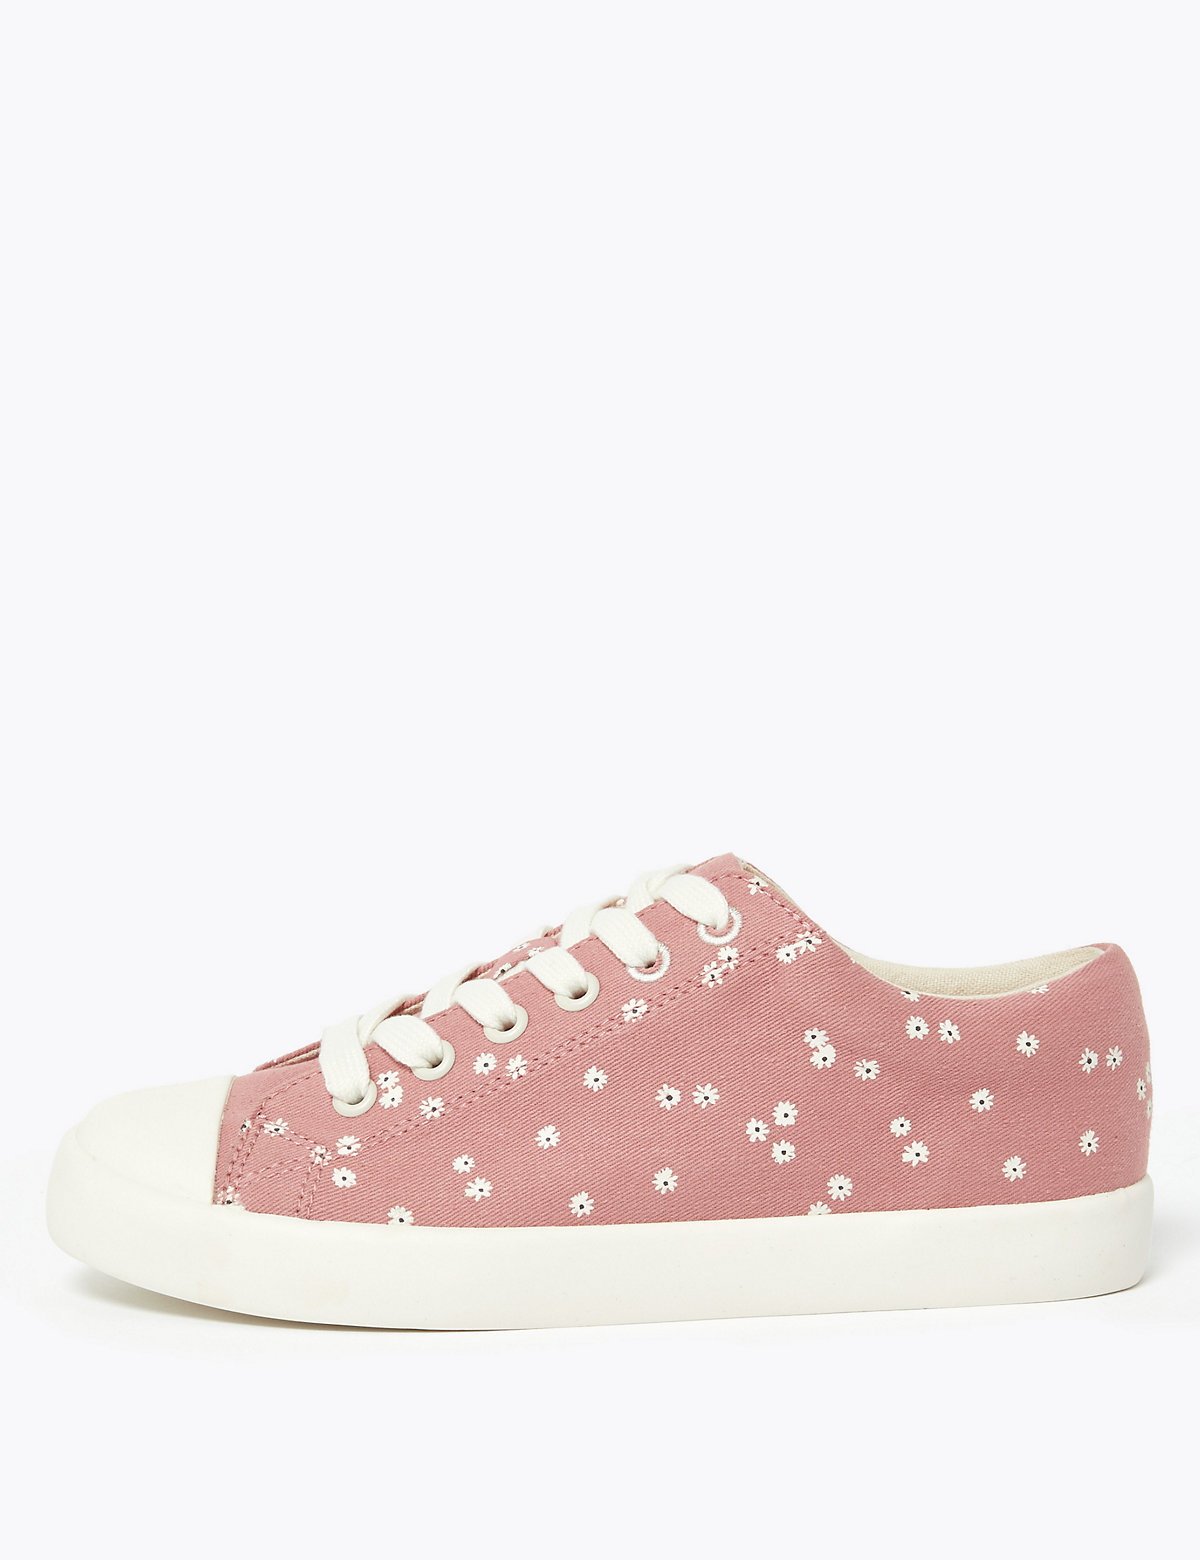 Kids' Canvas Floral Trainers